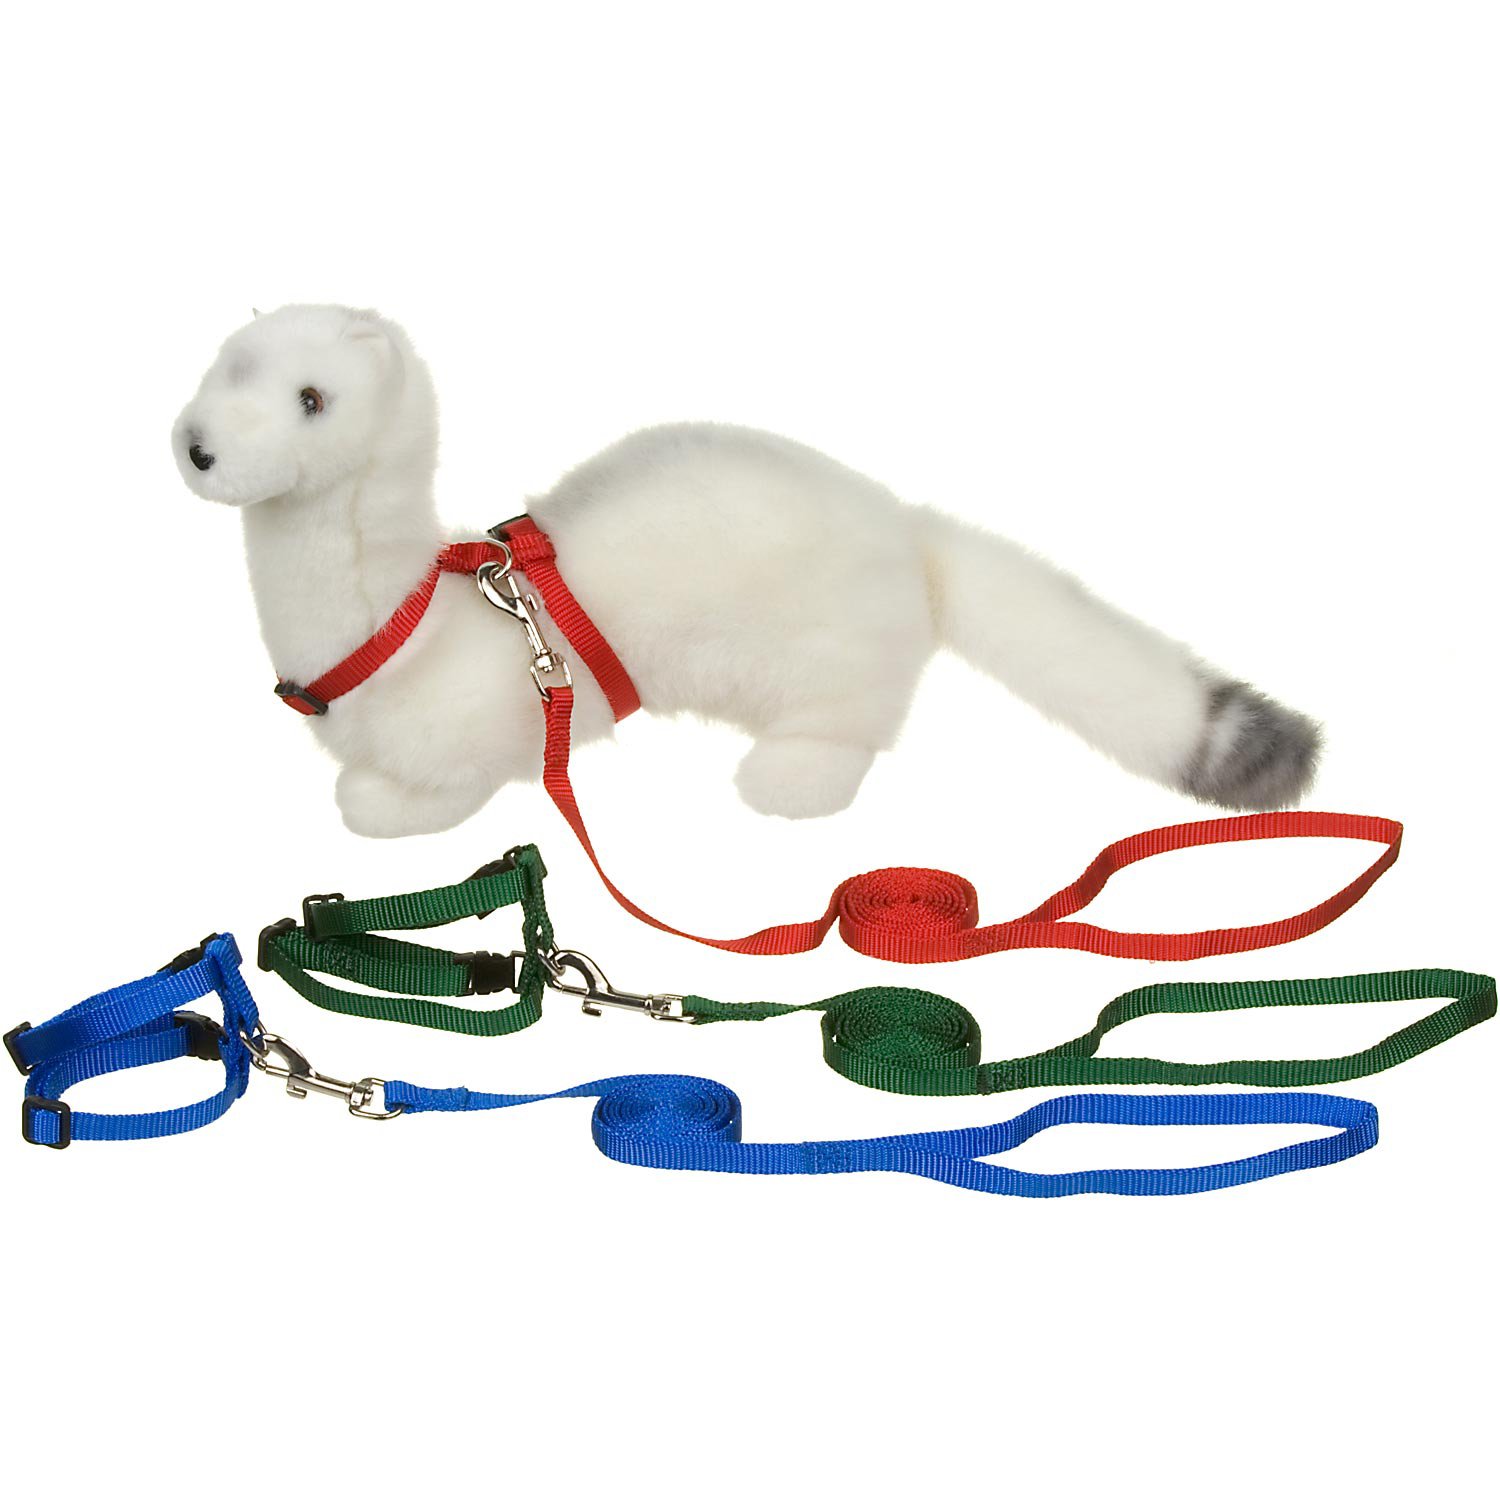 You &amp; Me Deluxe Ferret Harness &amp; Lead Set | Petco